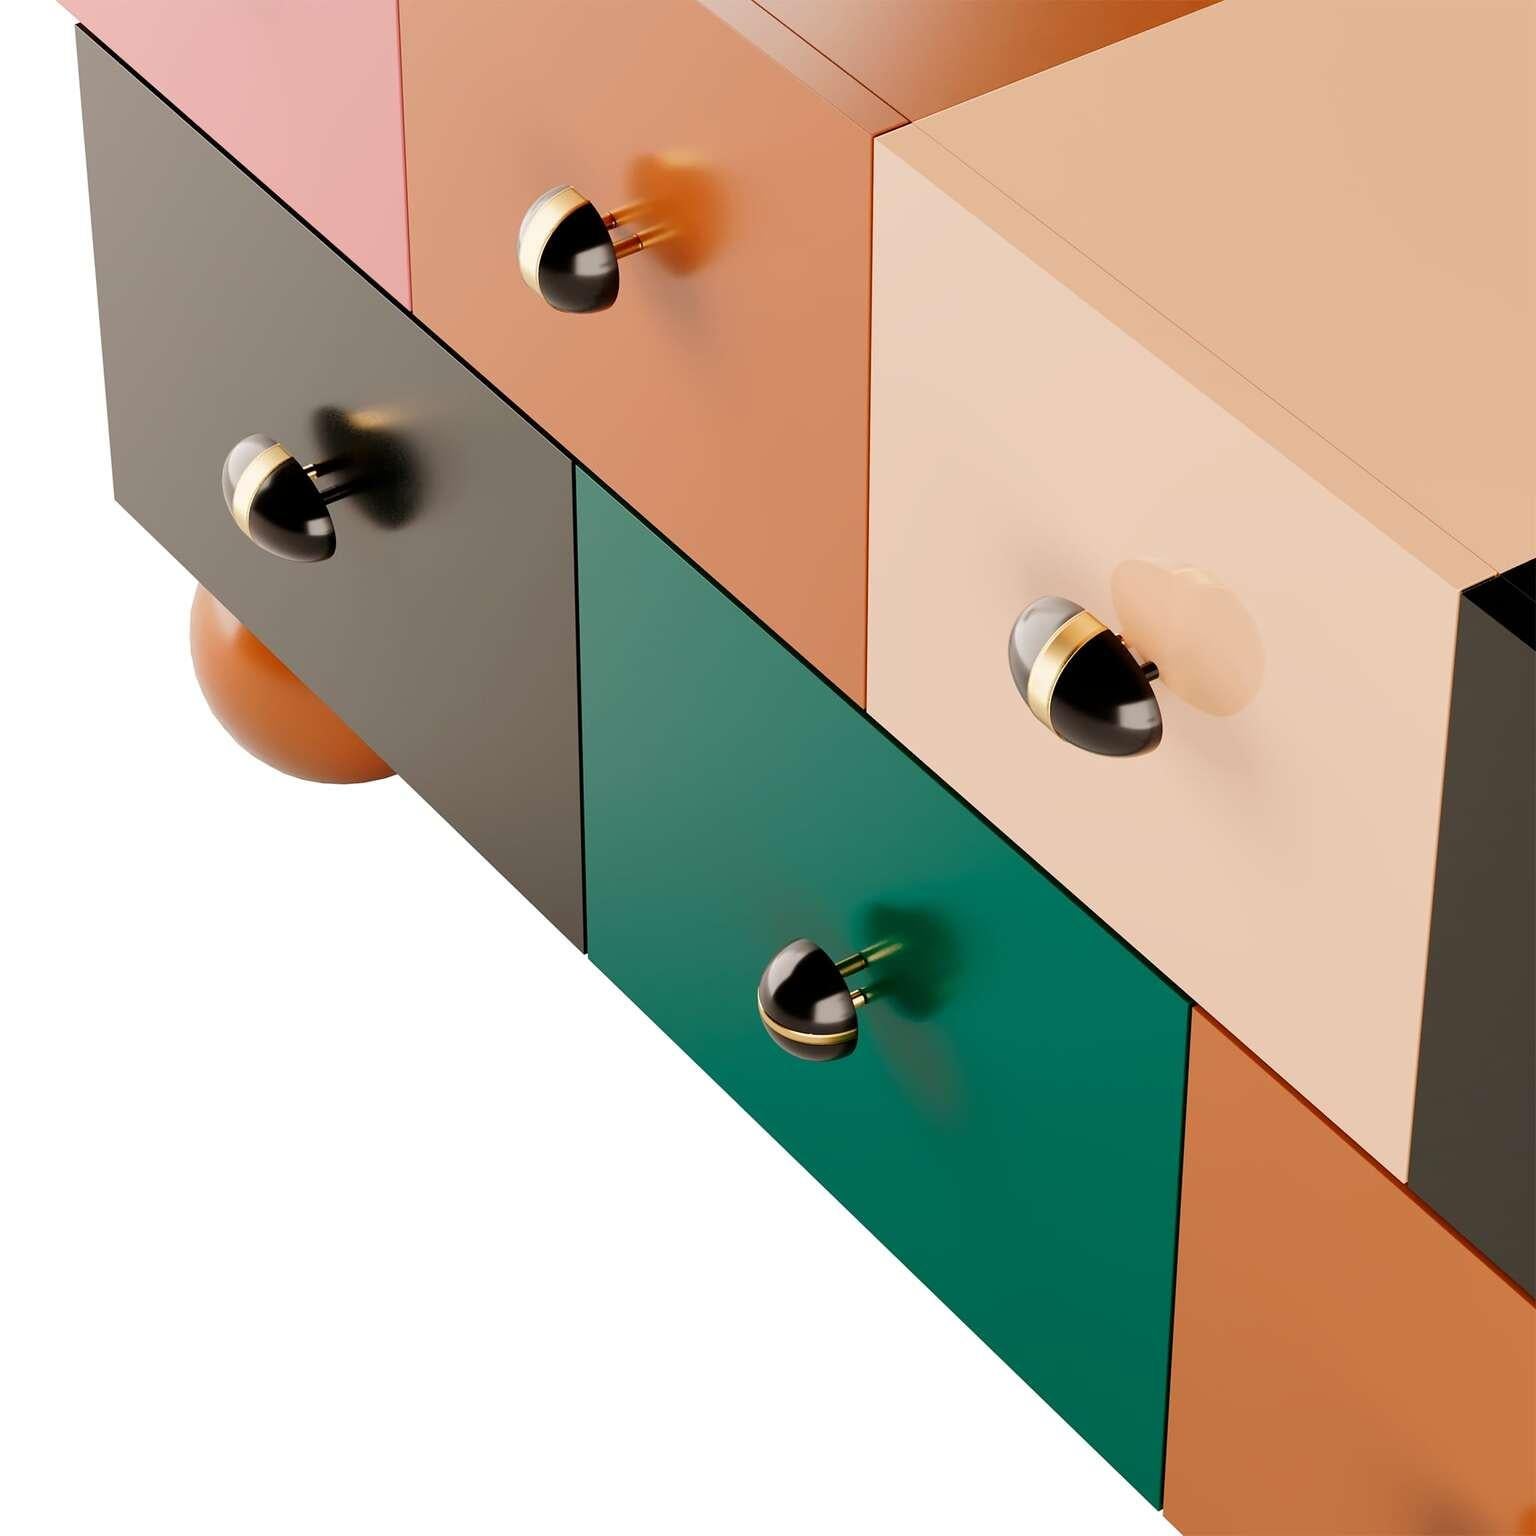 Memphis Style Sideboard Multicolor Lacquered in Pink, Green, Orange and Black
The Matrioska Chest of Drawers Multicolor is a visual wonder — from its exquisite craftsmanship to its bold impact. The exceptional design of this modern storage allows it